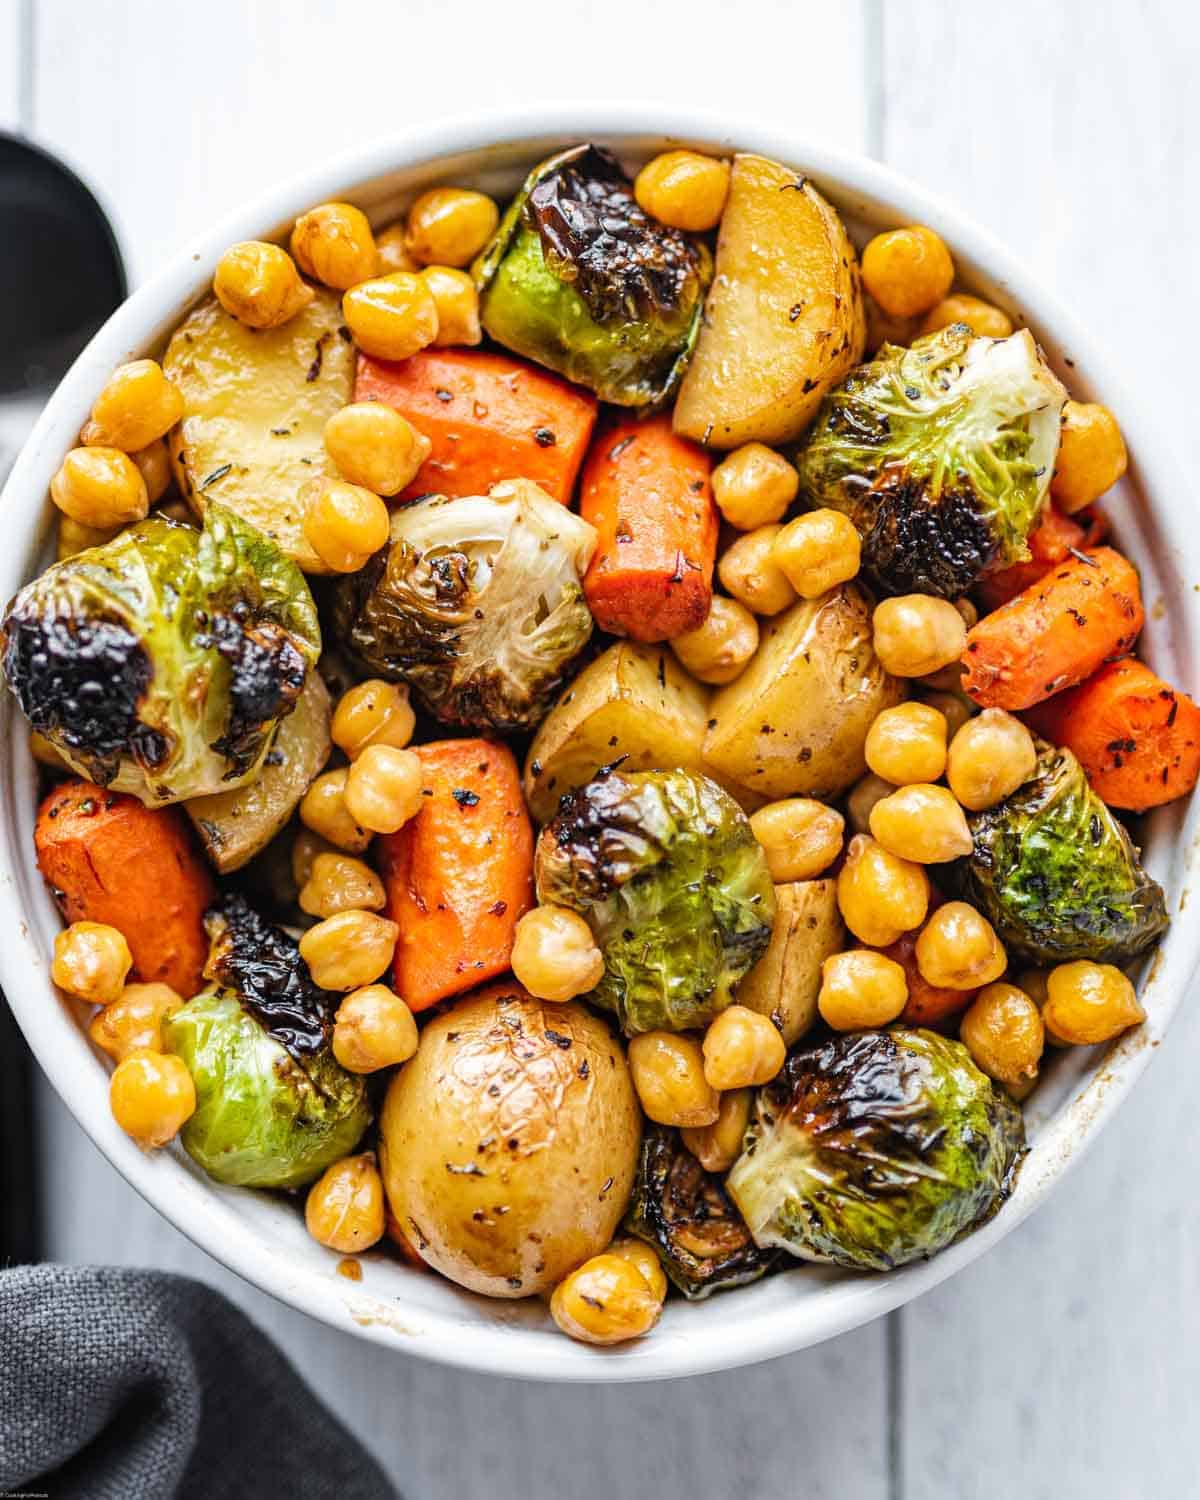 Roasted carrots, potatoes, Brussels sprouts, and chickpeas in a white bowl for serving.